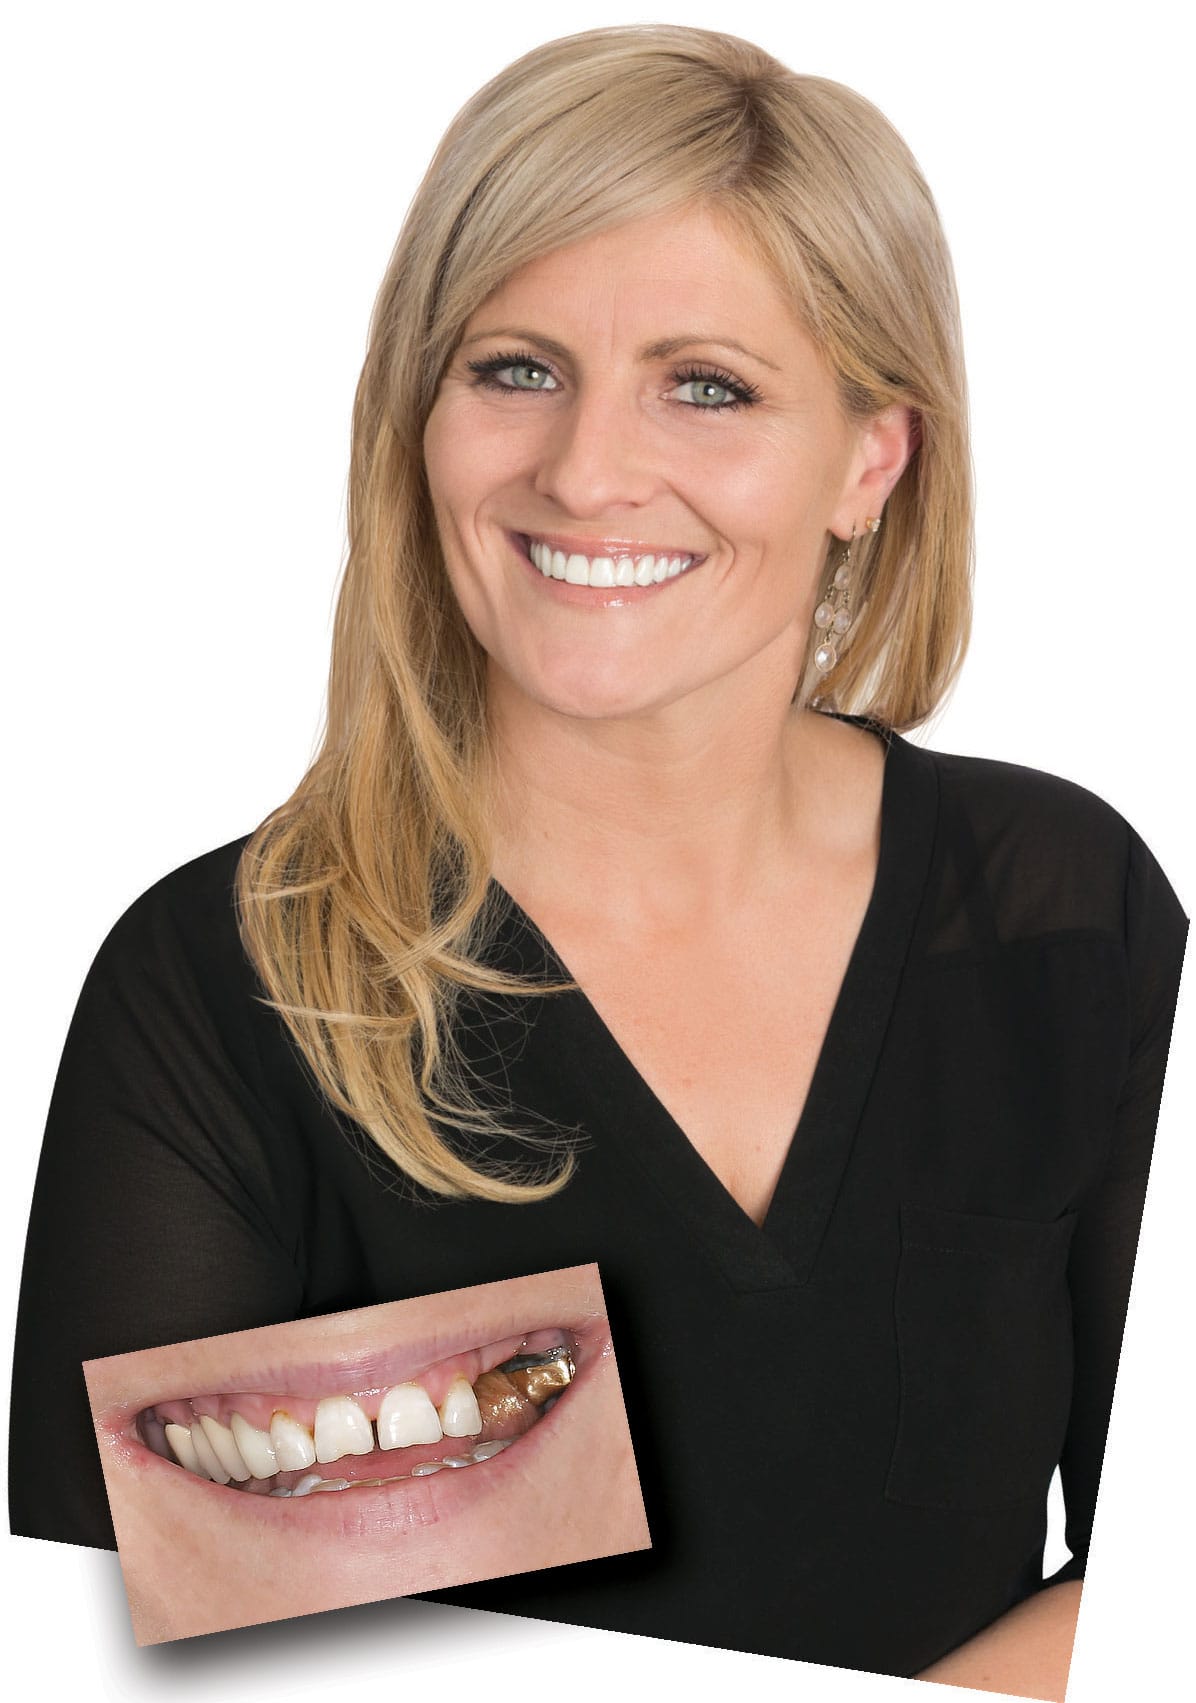 Carly age 39, TeethXpress patient, great teeth.